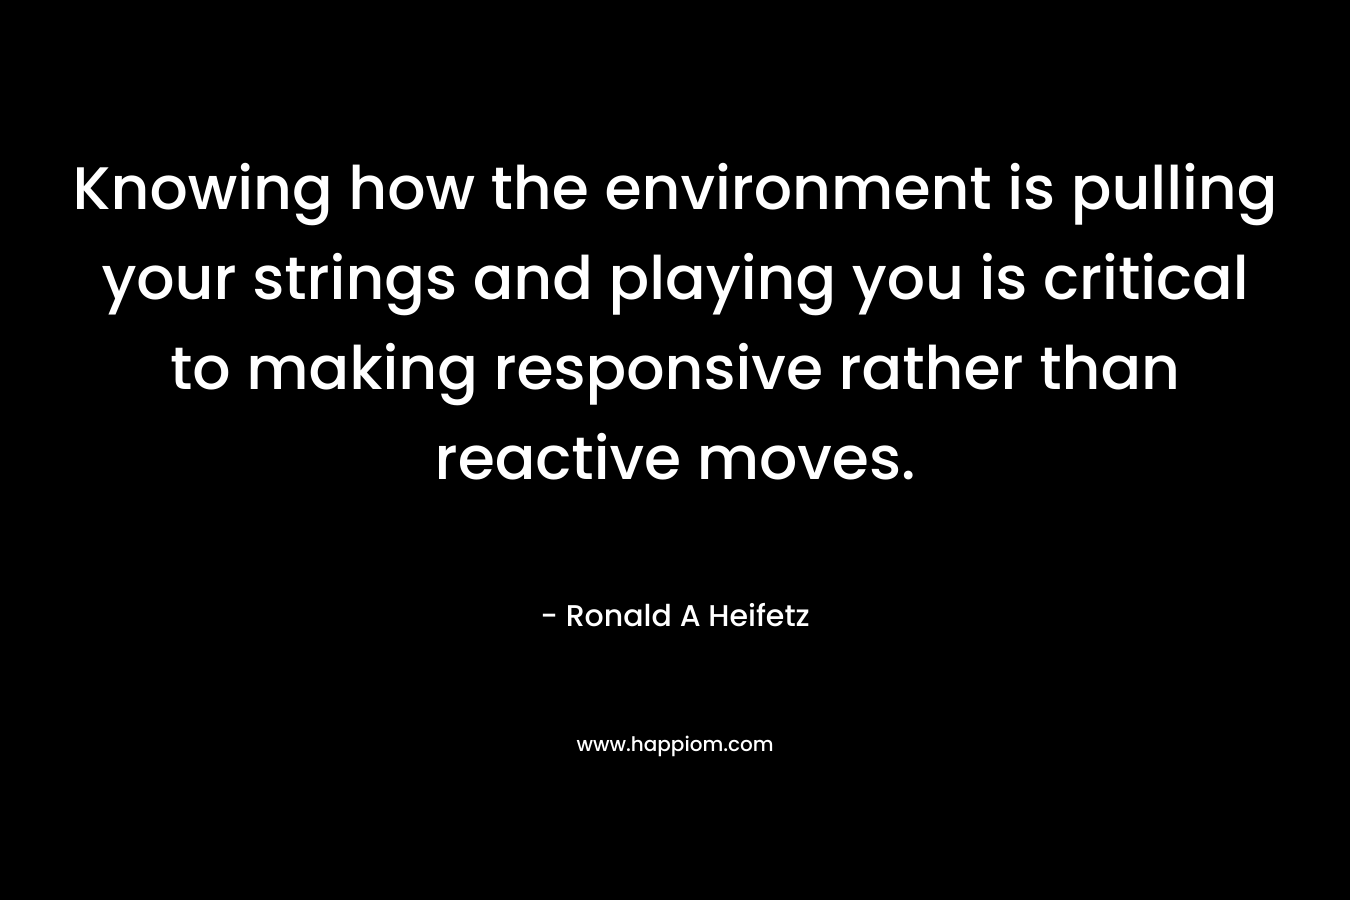 Knowing how the environment is pulling your strings and playing you is critical to making responsive rather than reactive moves. – Ronald A Heifetz